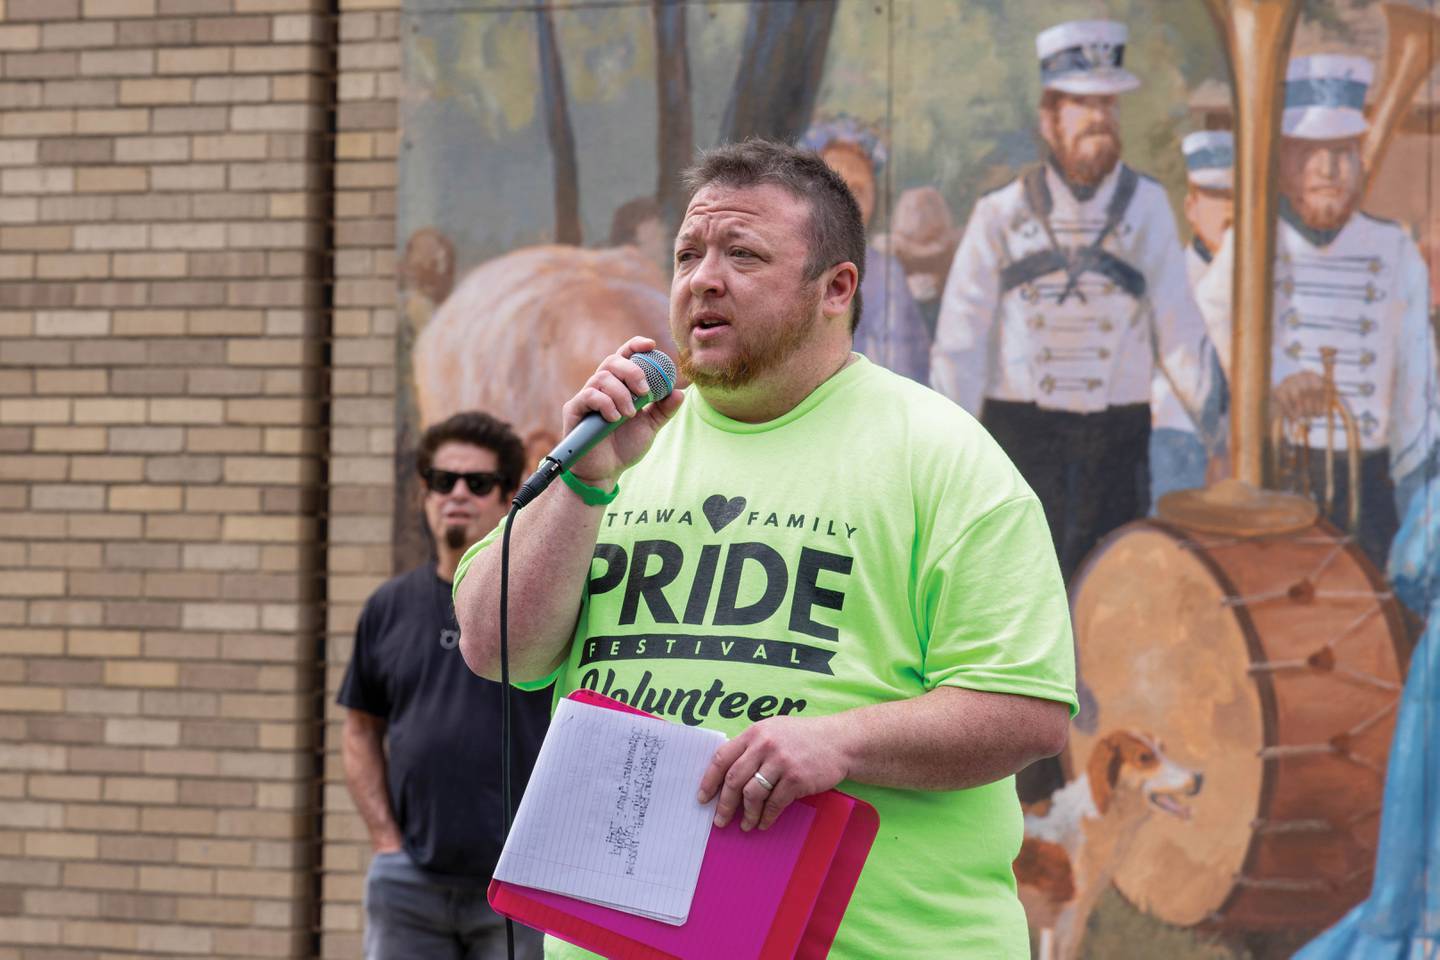 Ottawa Family Pride Festival organizer Dylan Conmy speaks during the inaugural event in 2022. The festival serves as a fundraiser for Youth Outlook to assist LGBTQ+ adolescents.